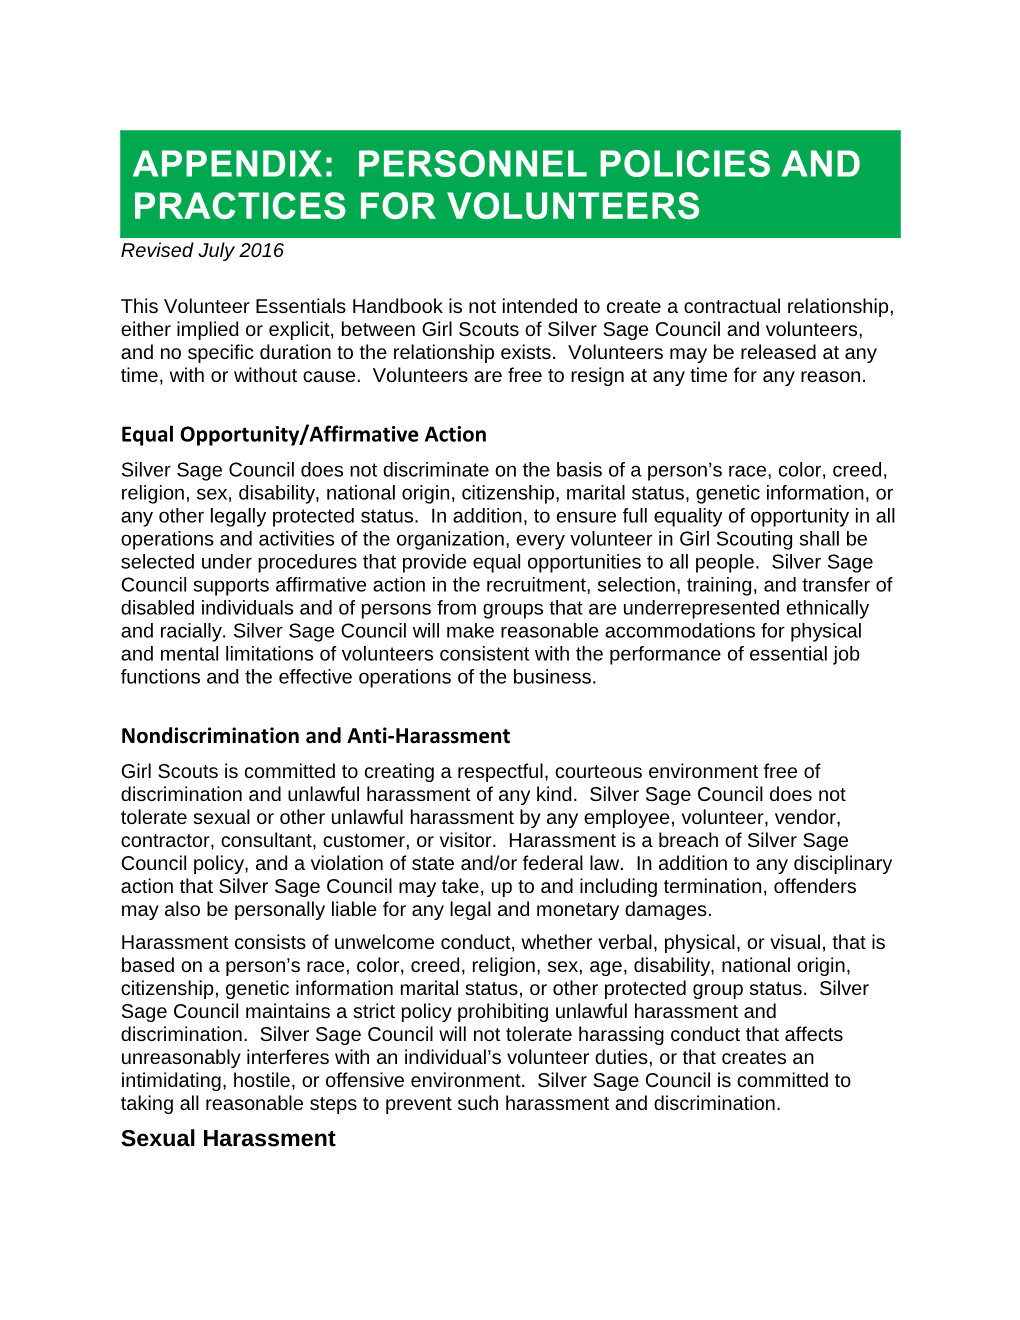 Appendix: Personnel Policies and Practices for Volunteers